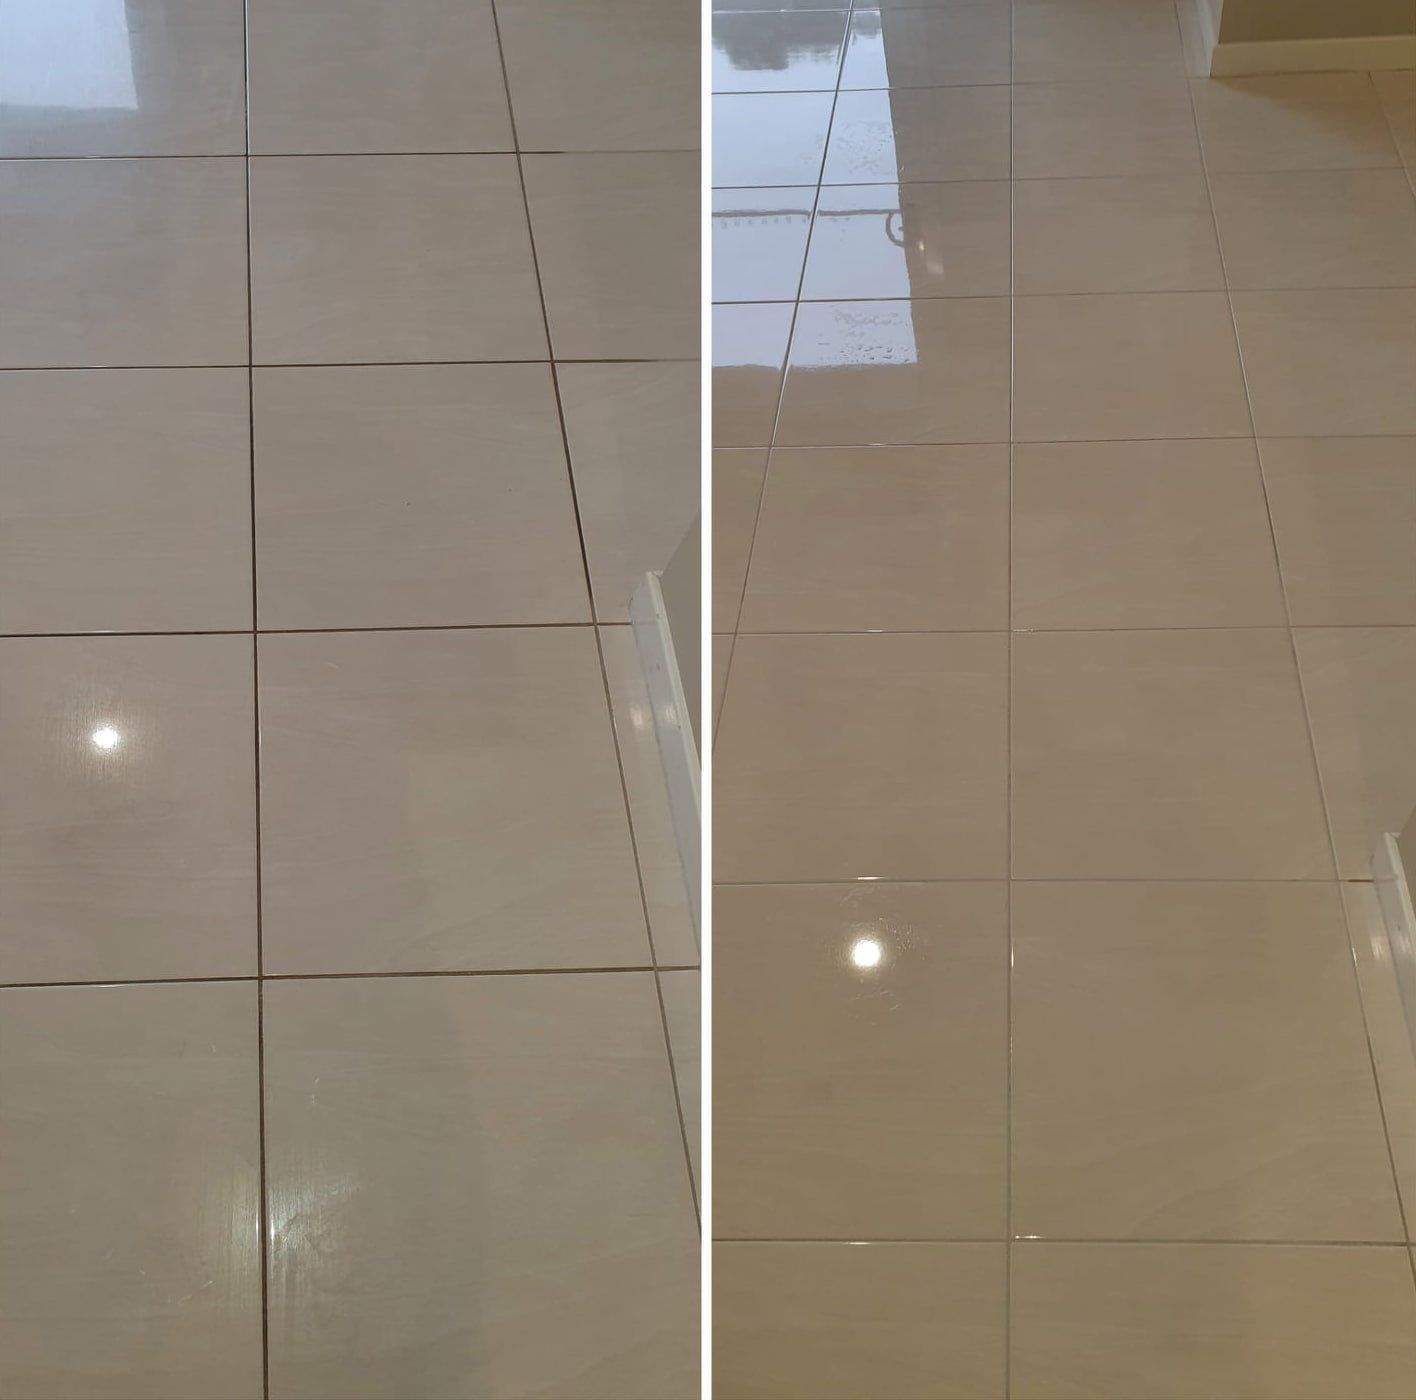 Grout Cleaning Before And After — Carpet Cleaning in Maitland, NSW